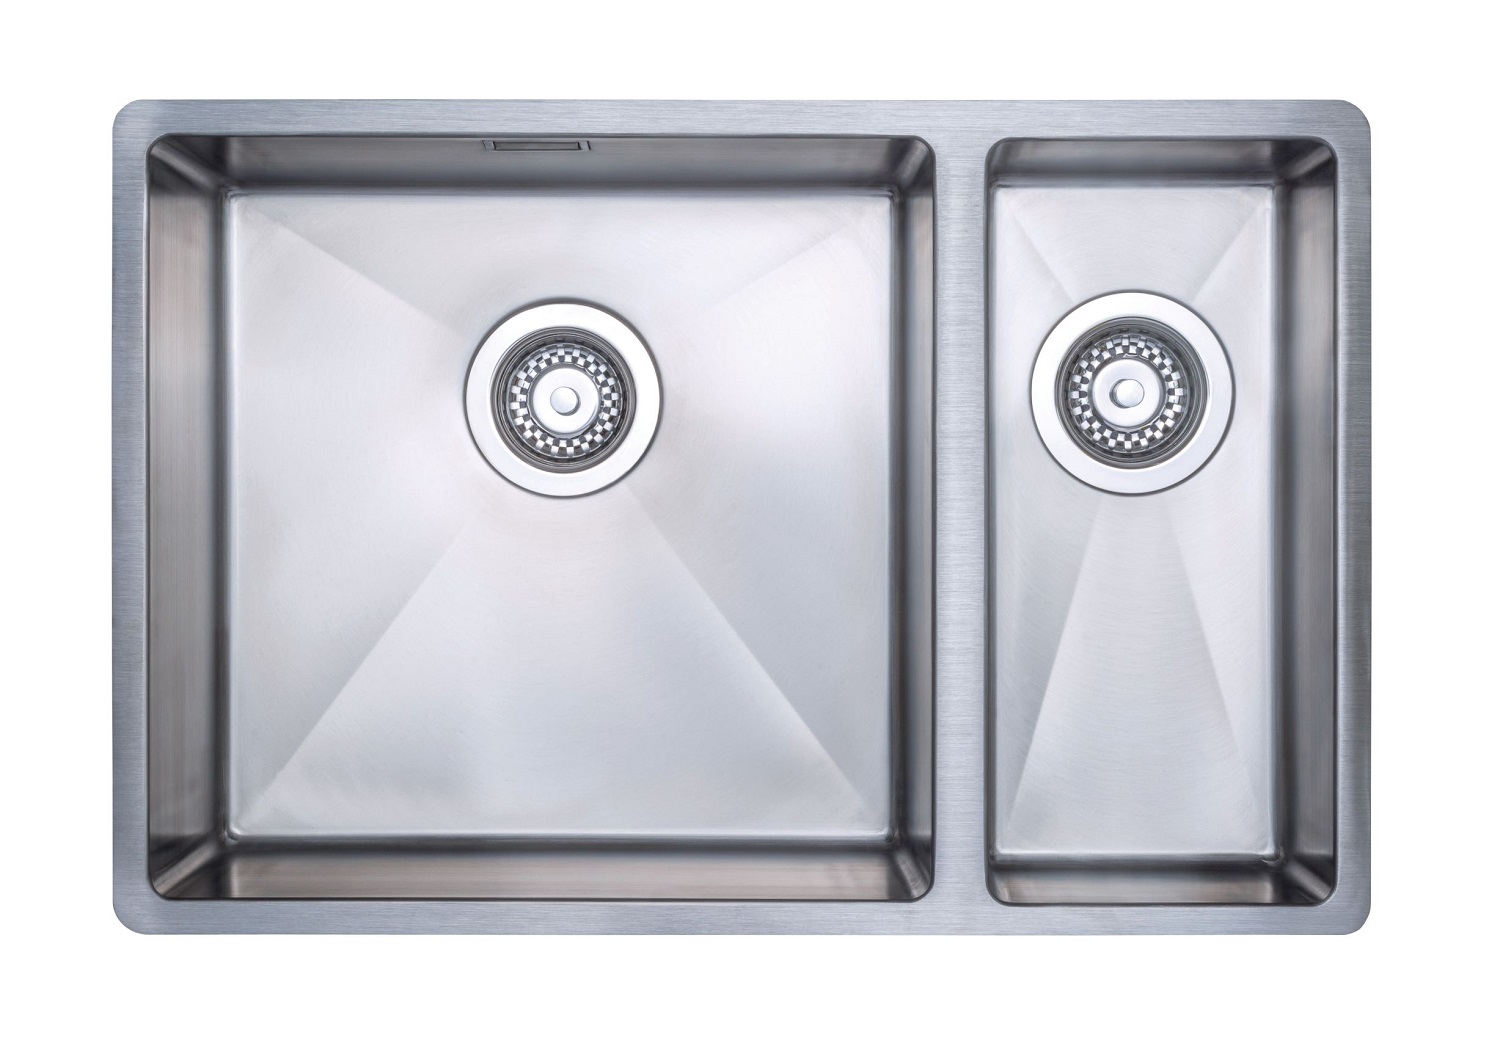 Tight Radius Undermount Sinks launched by Prima+